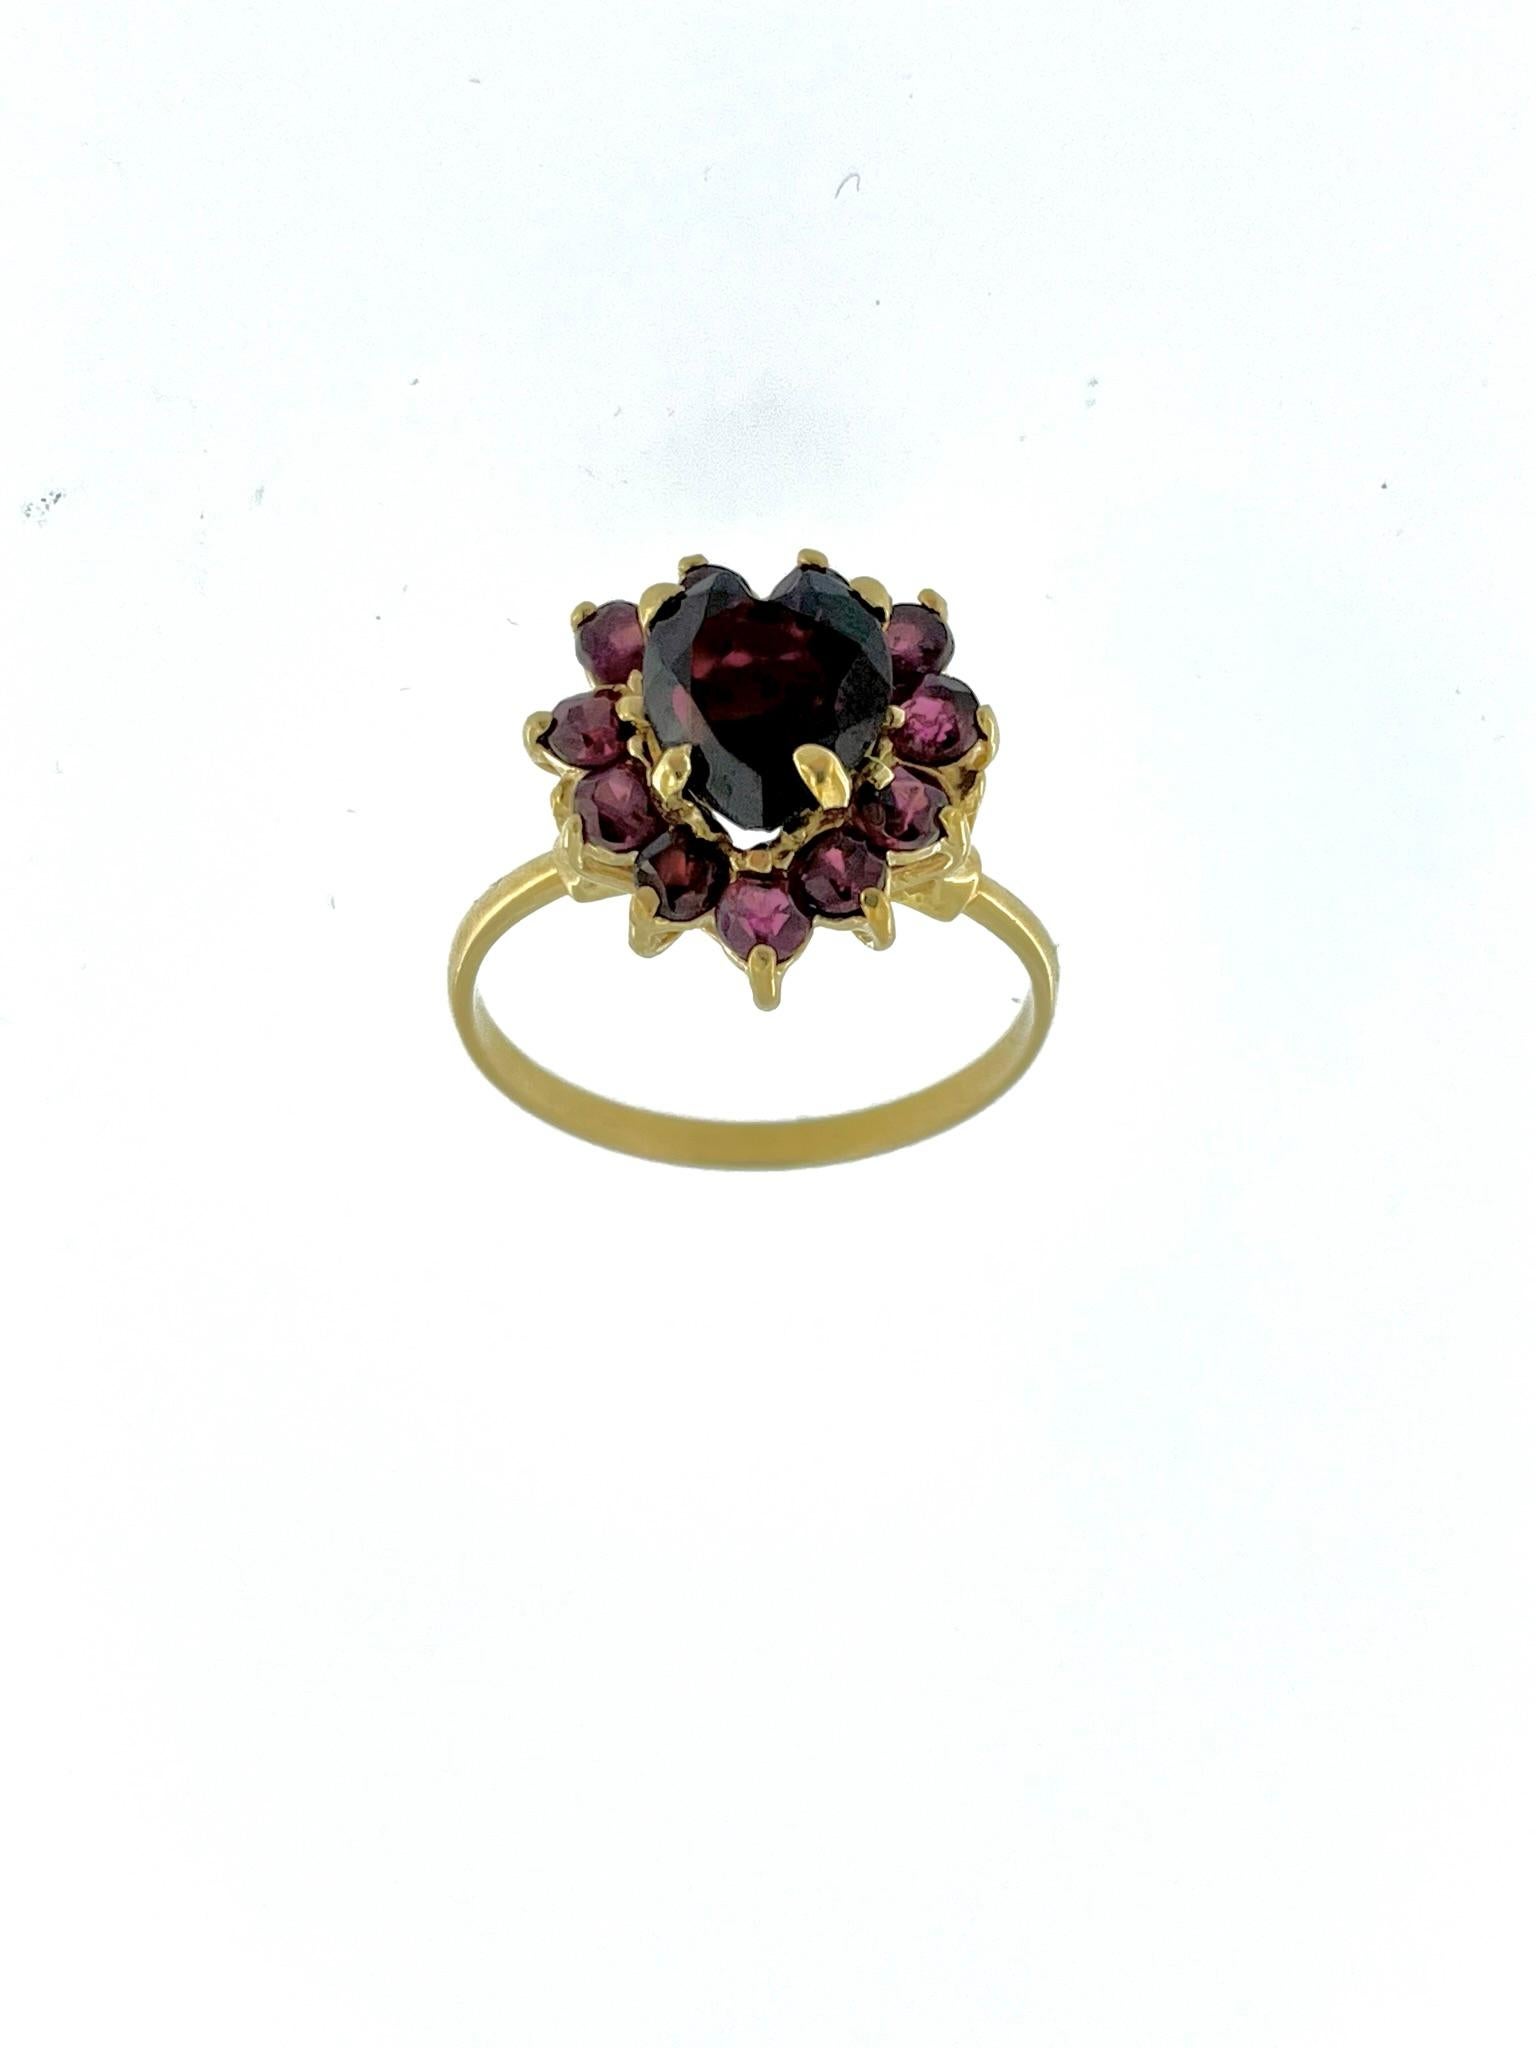 This Vintage Spanish 18kt Yellow Gold Ring with Amethyst is a stunning piece of jewelry that showcases both exquisite craftsmanship and a captivating gemstone. The ring is crafted from 18-karat (18kt) yellow gold, which is known for its rich, warm